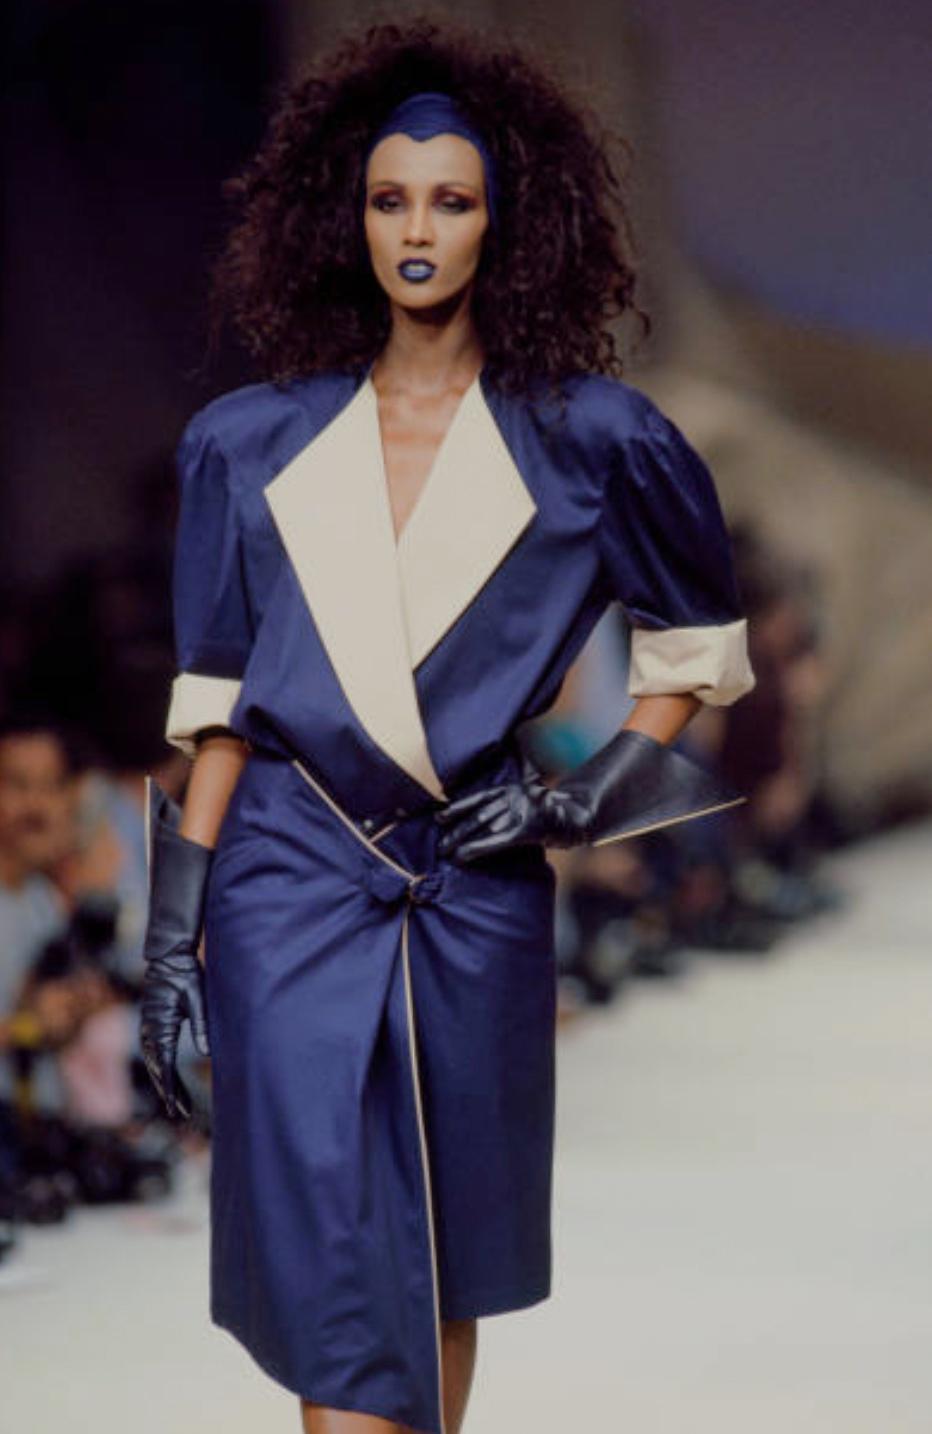 
Holy Grail Collectors Piece. Breathtaking Thierry Mugler Dress, Spring Summer Collection 1986. Worn by the gorgeous Iman on the Runway and also for the Campaign shoot. Documented Thierry Mugler Dress.
Dark blue dress with huge dramatic collar and